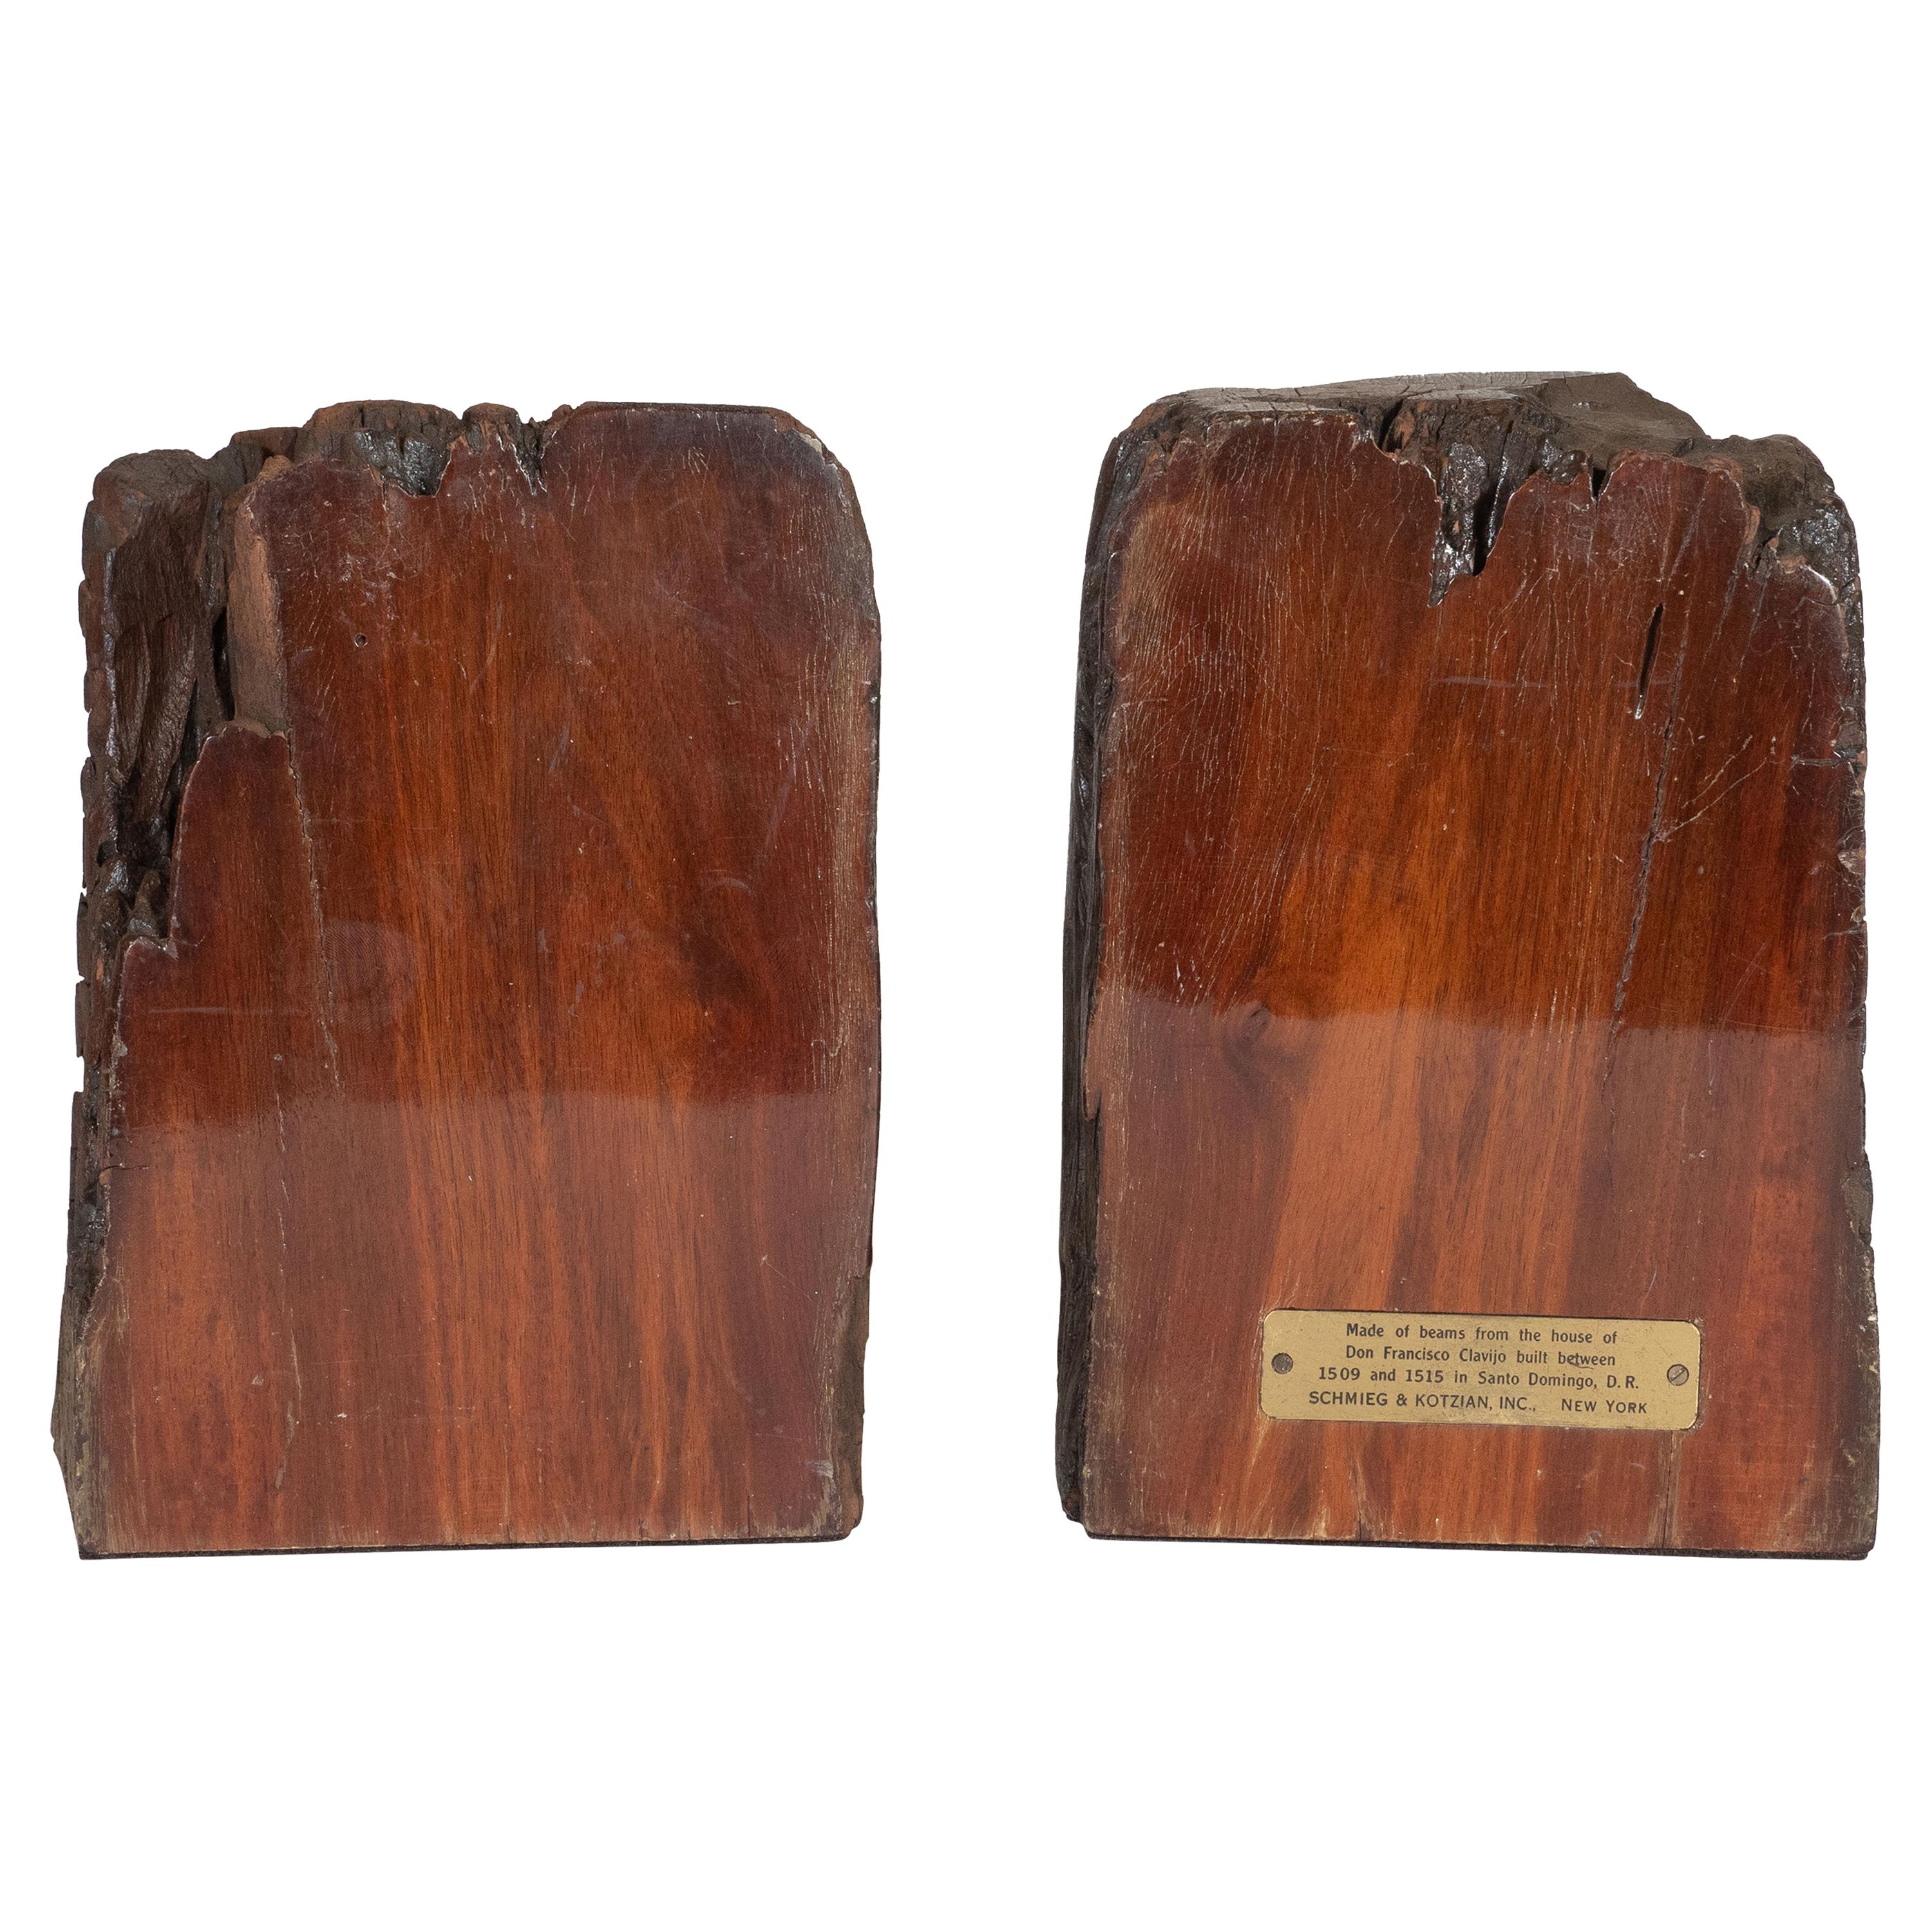 This elegant pair of midcentury organic modern book ends were realized by the esteemed company Schmieg & Kotzian in the United States, circa 1950. The book ends were repurposed caobo (tropical mahogany) wood beams extracted from the house of Don